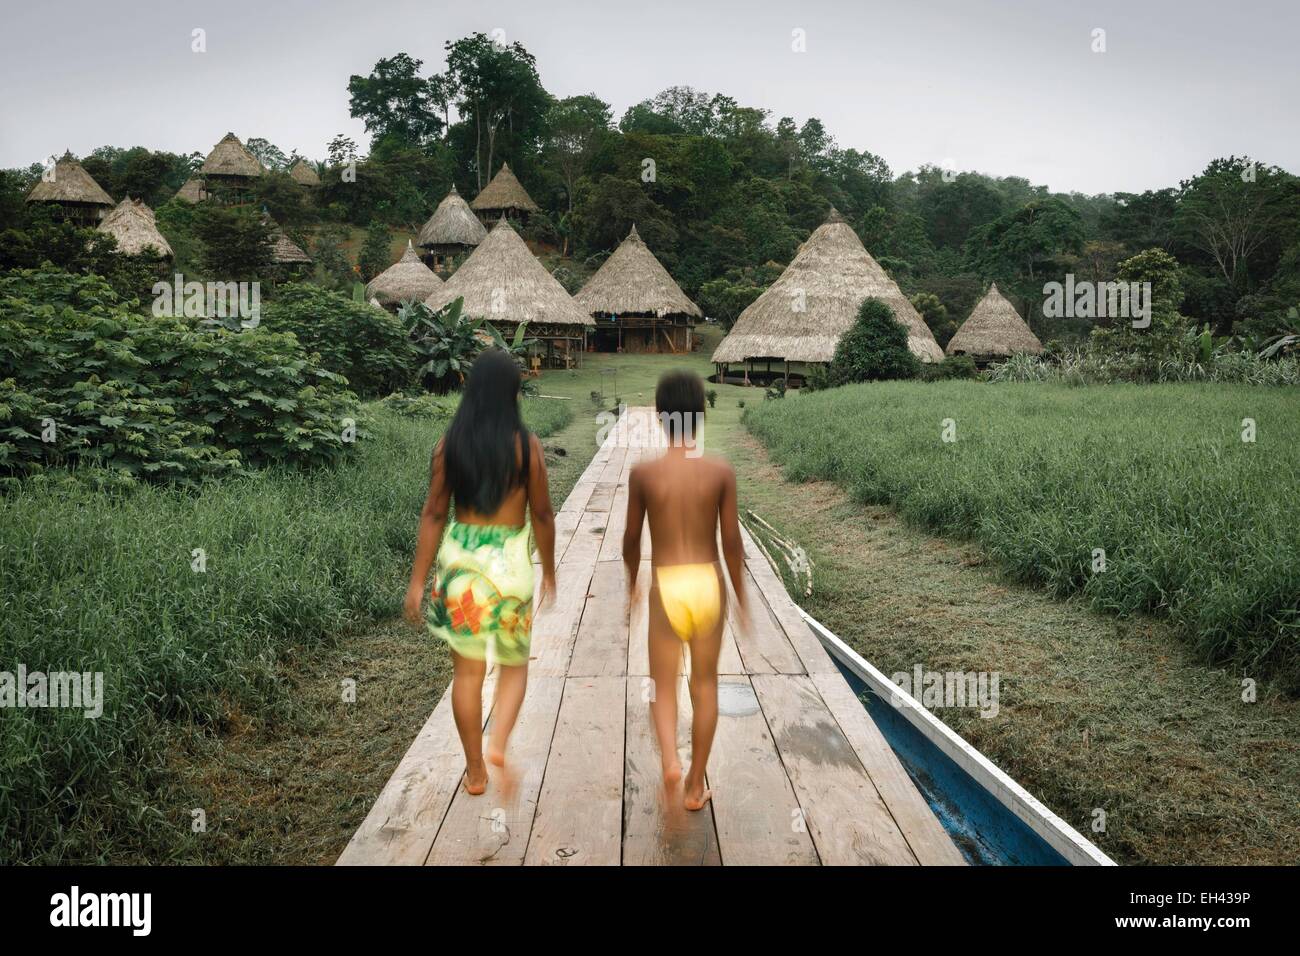 Panama, Darien province, Darien National Park, listed as World Heritage by UNESCO, Embera indigenous community, a boy and a girl on a boardwalk heading towards a village Stock Photo